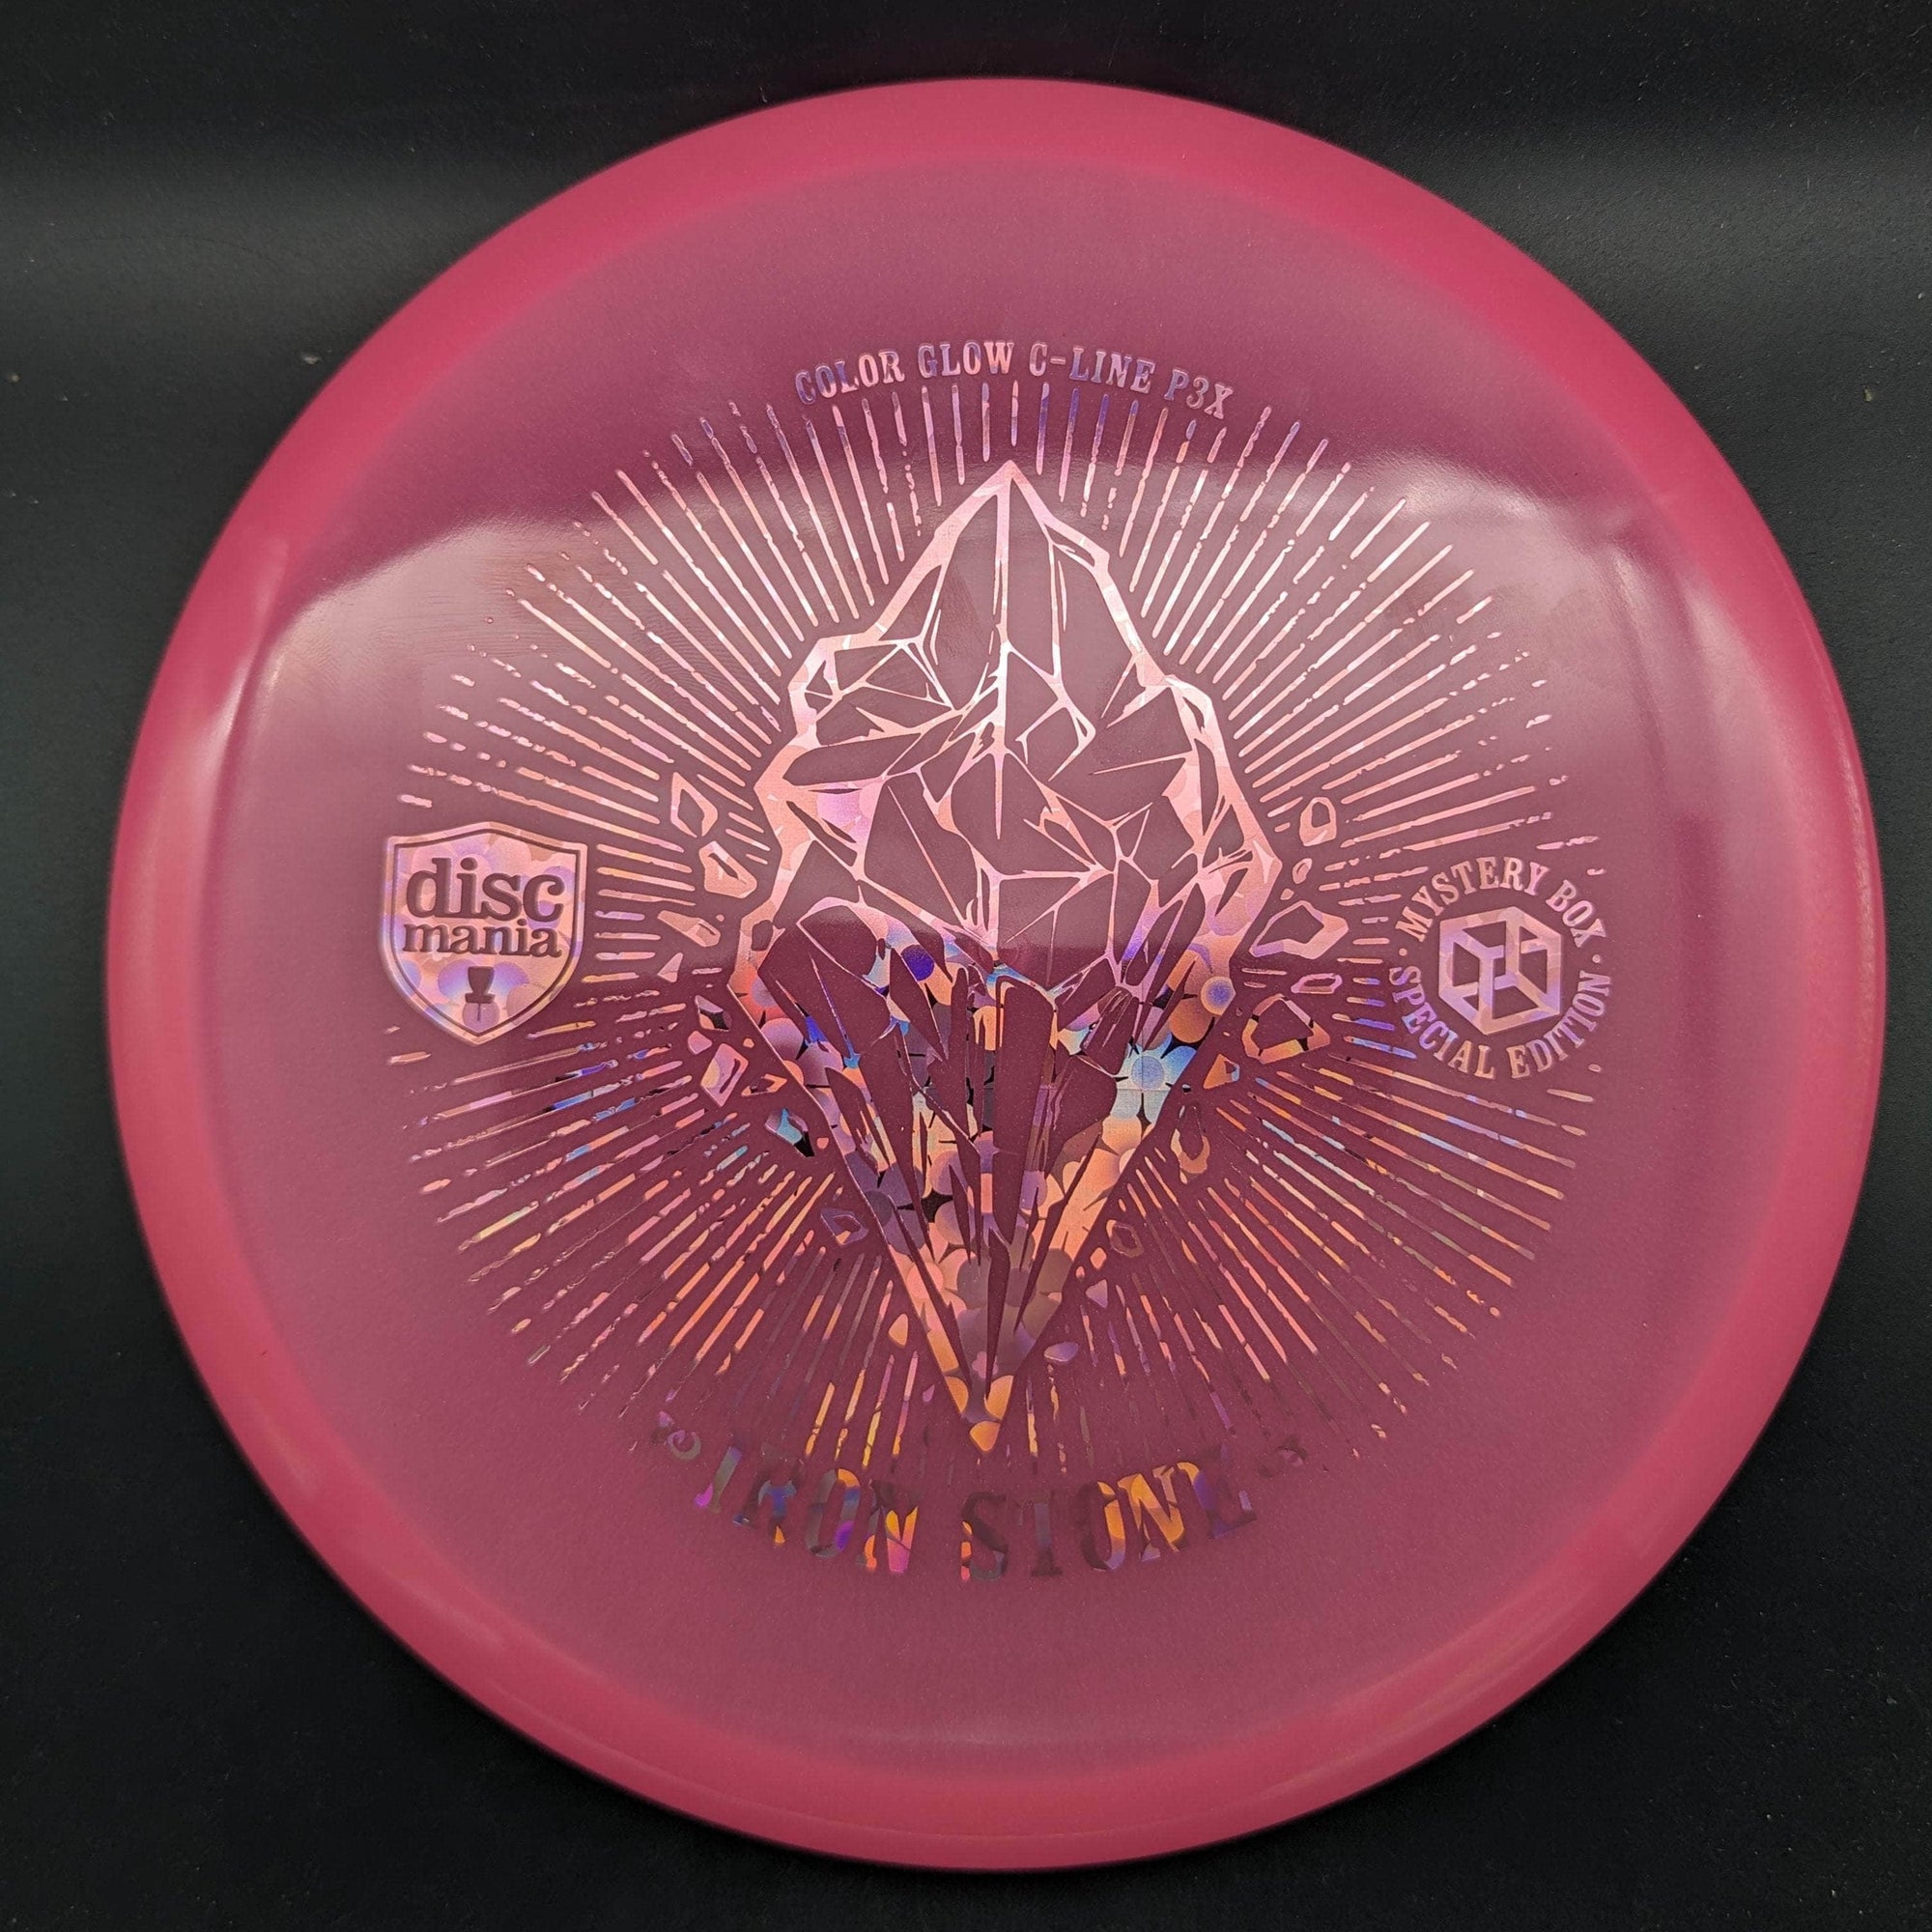 Discmania Putter Pink Pink Shatter Stamp 176g P3X, Color Glow C-Line, Iron Stone